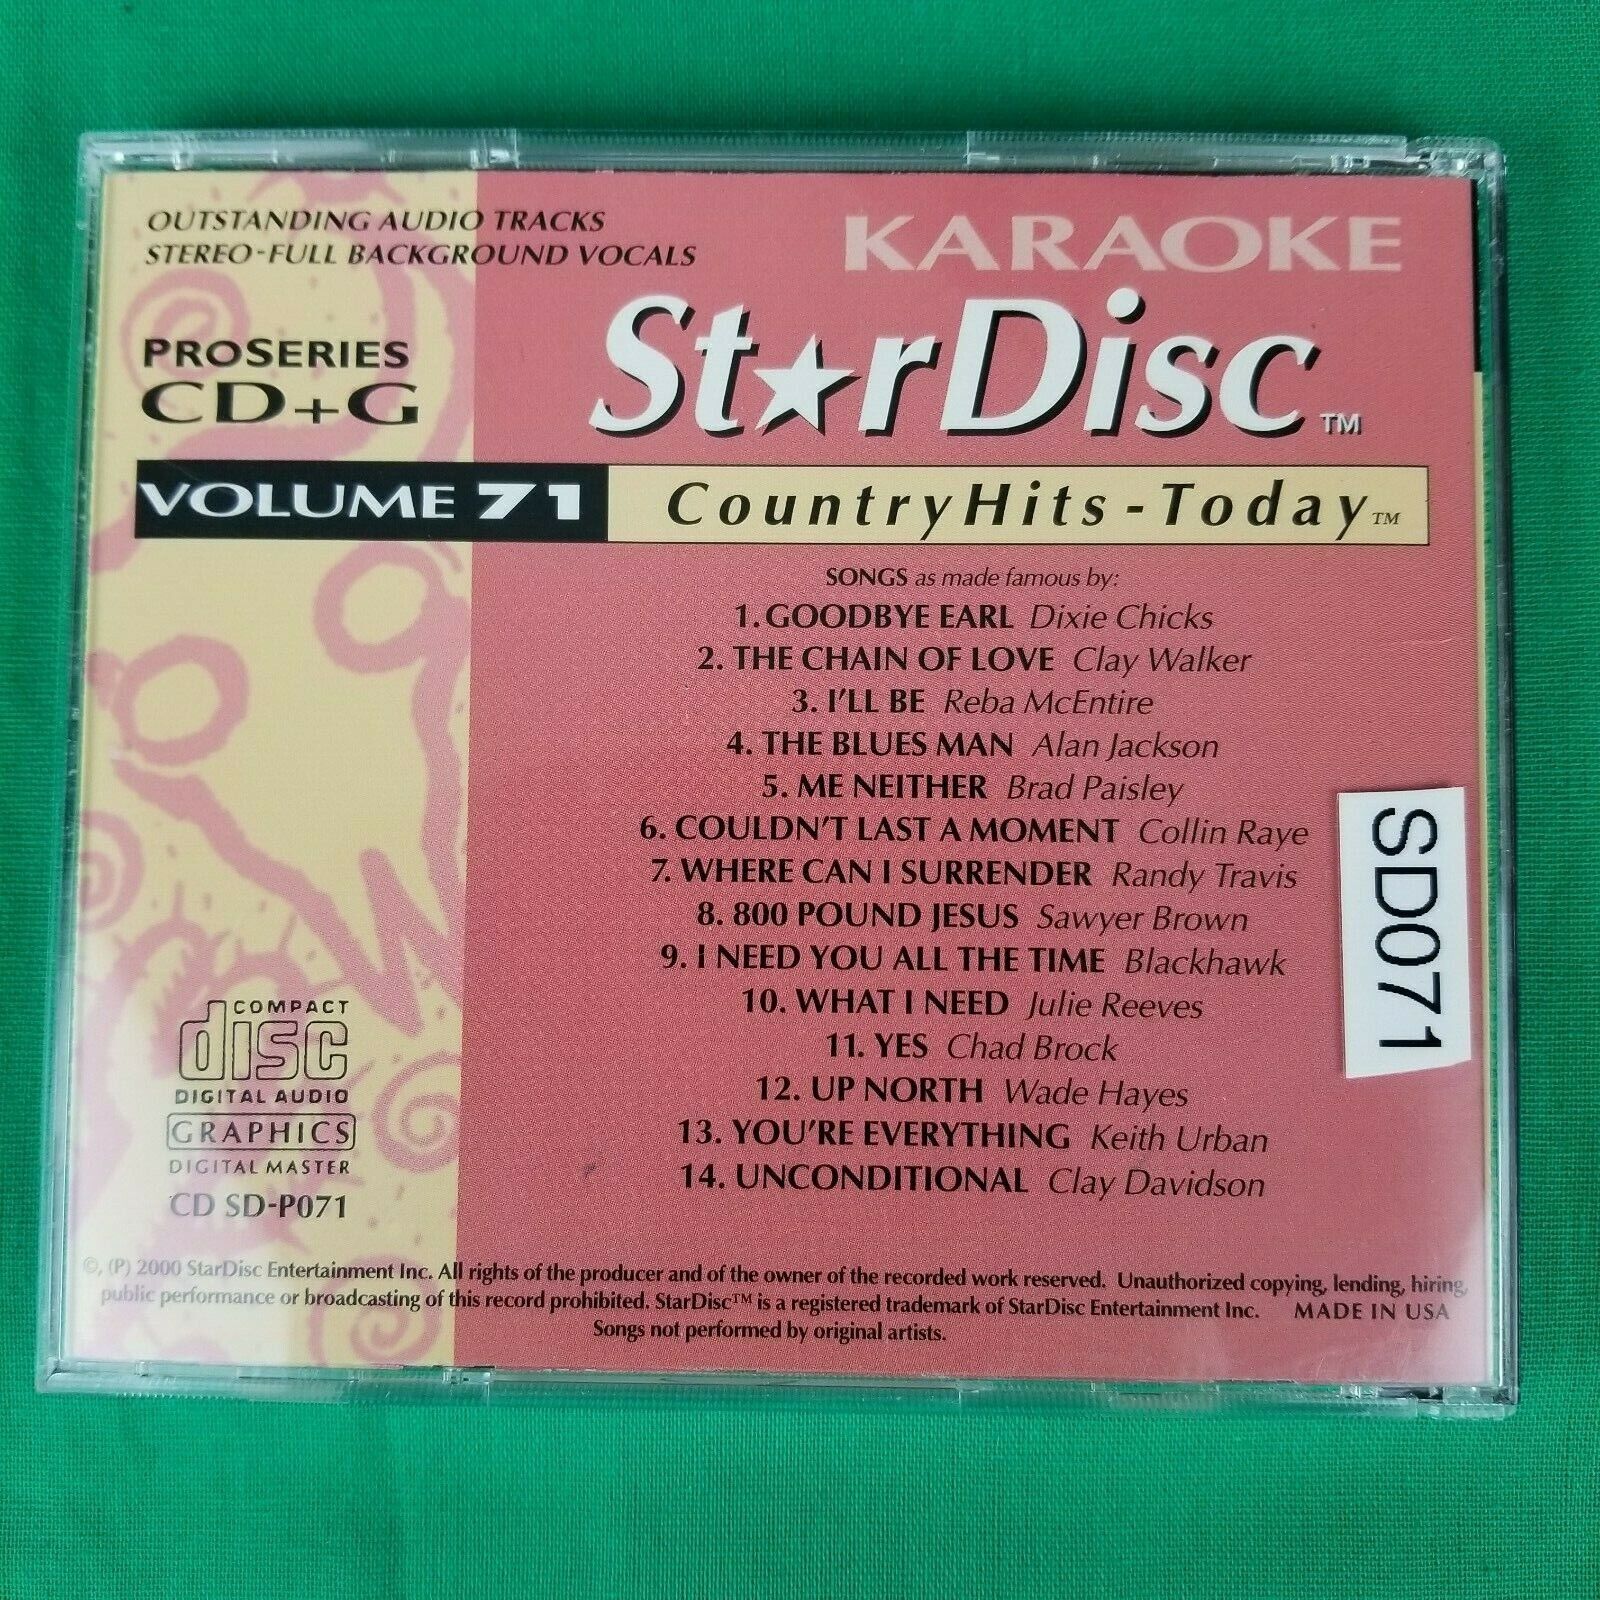 Pre-Owned Lot of 2 StarDisc Karaoke Country Classics CD+G Volume 62 & 71 Star Disc - фотография #4